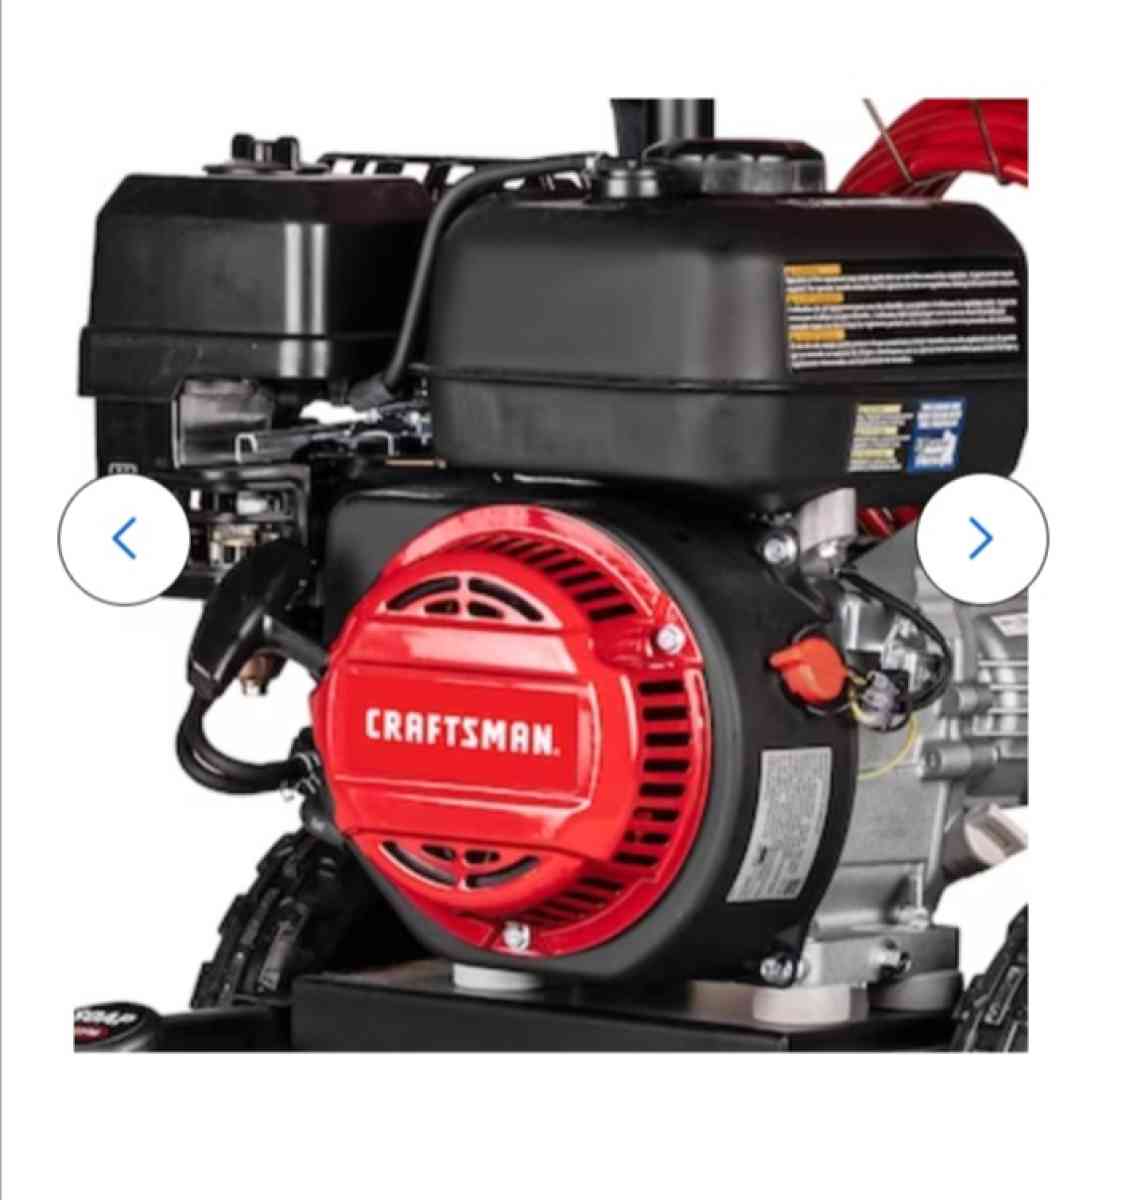 CRAFTSMAN 3400 PSI 24Gallons Cold Water Gas Pressure Washer